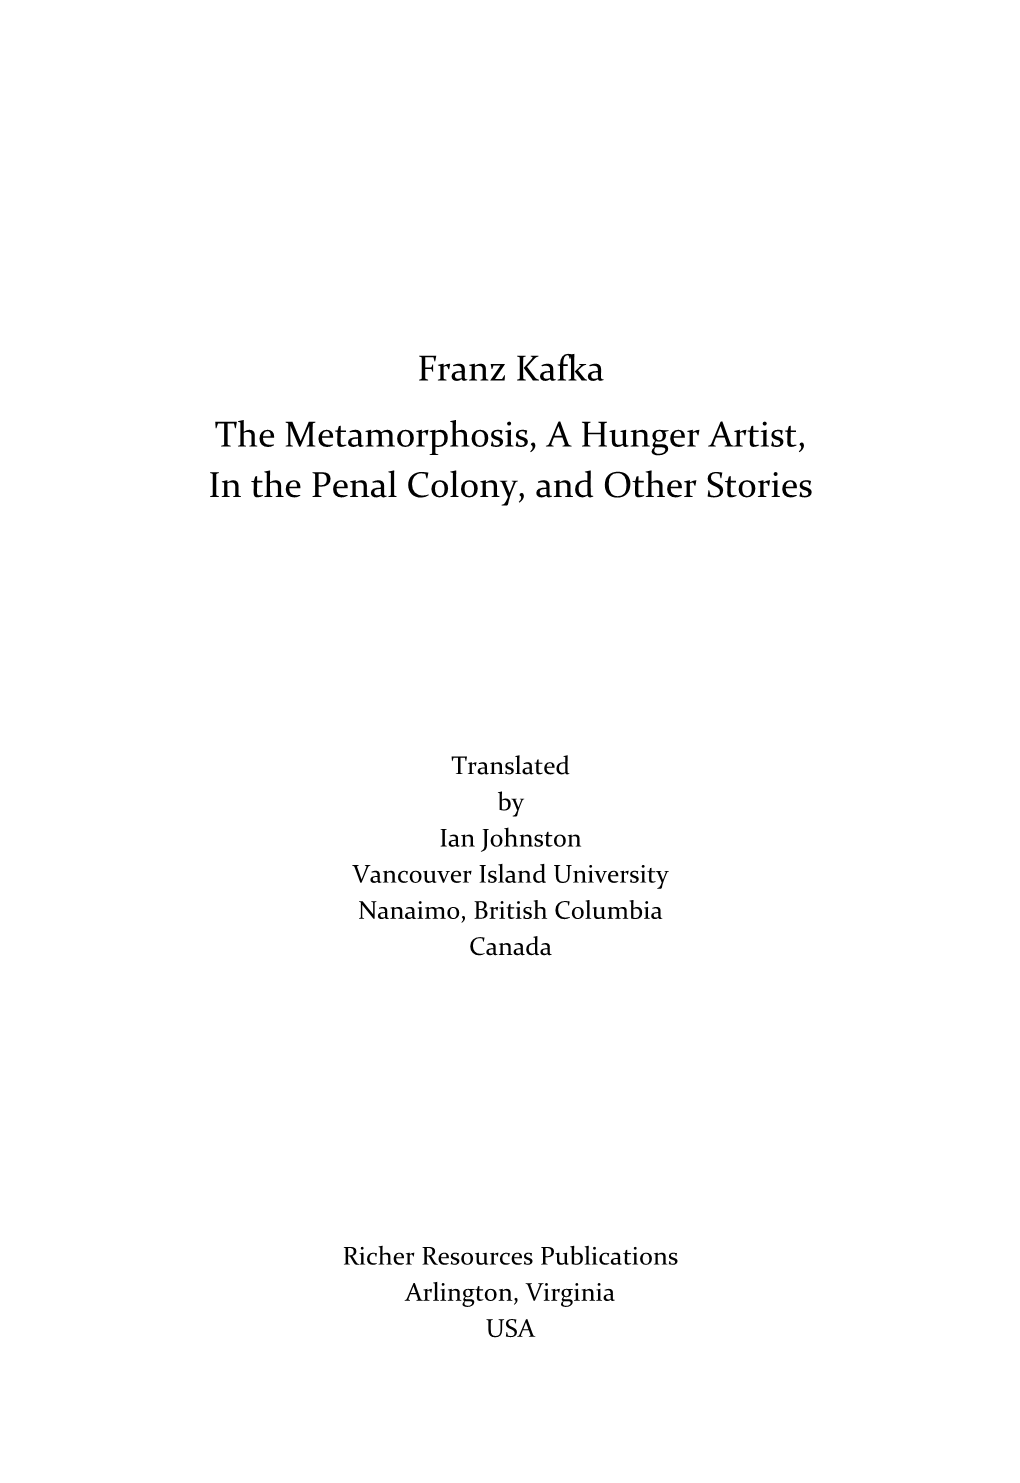 Franz Kafka the Metamorphosis, a Hunger Artist, in the Penal Colony, and Other Stories